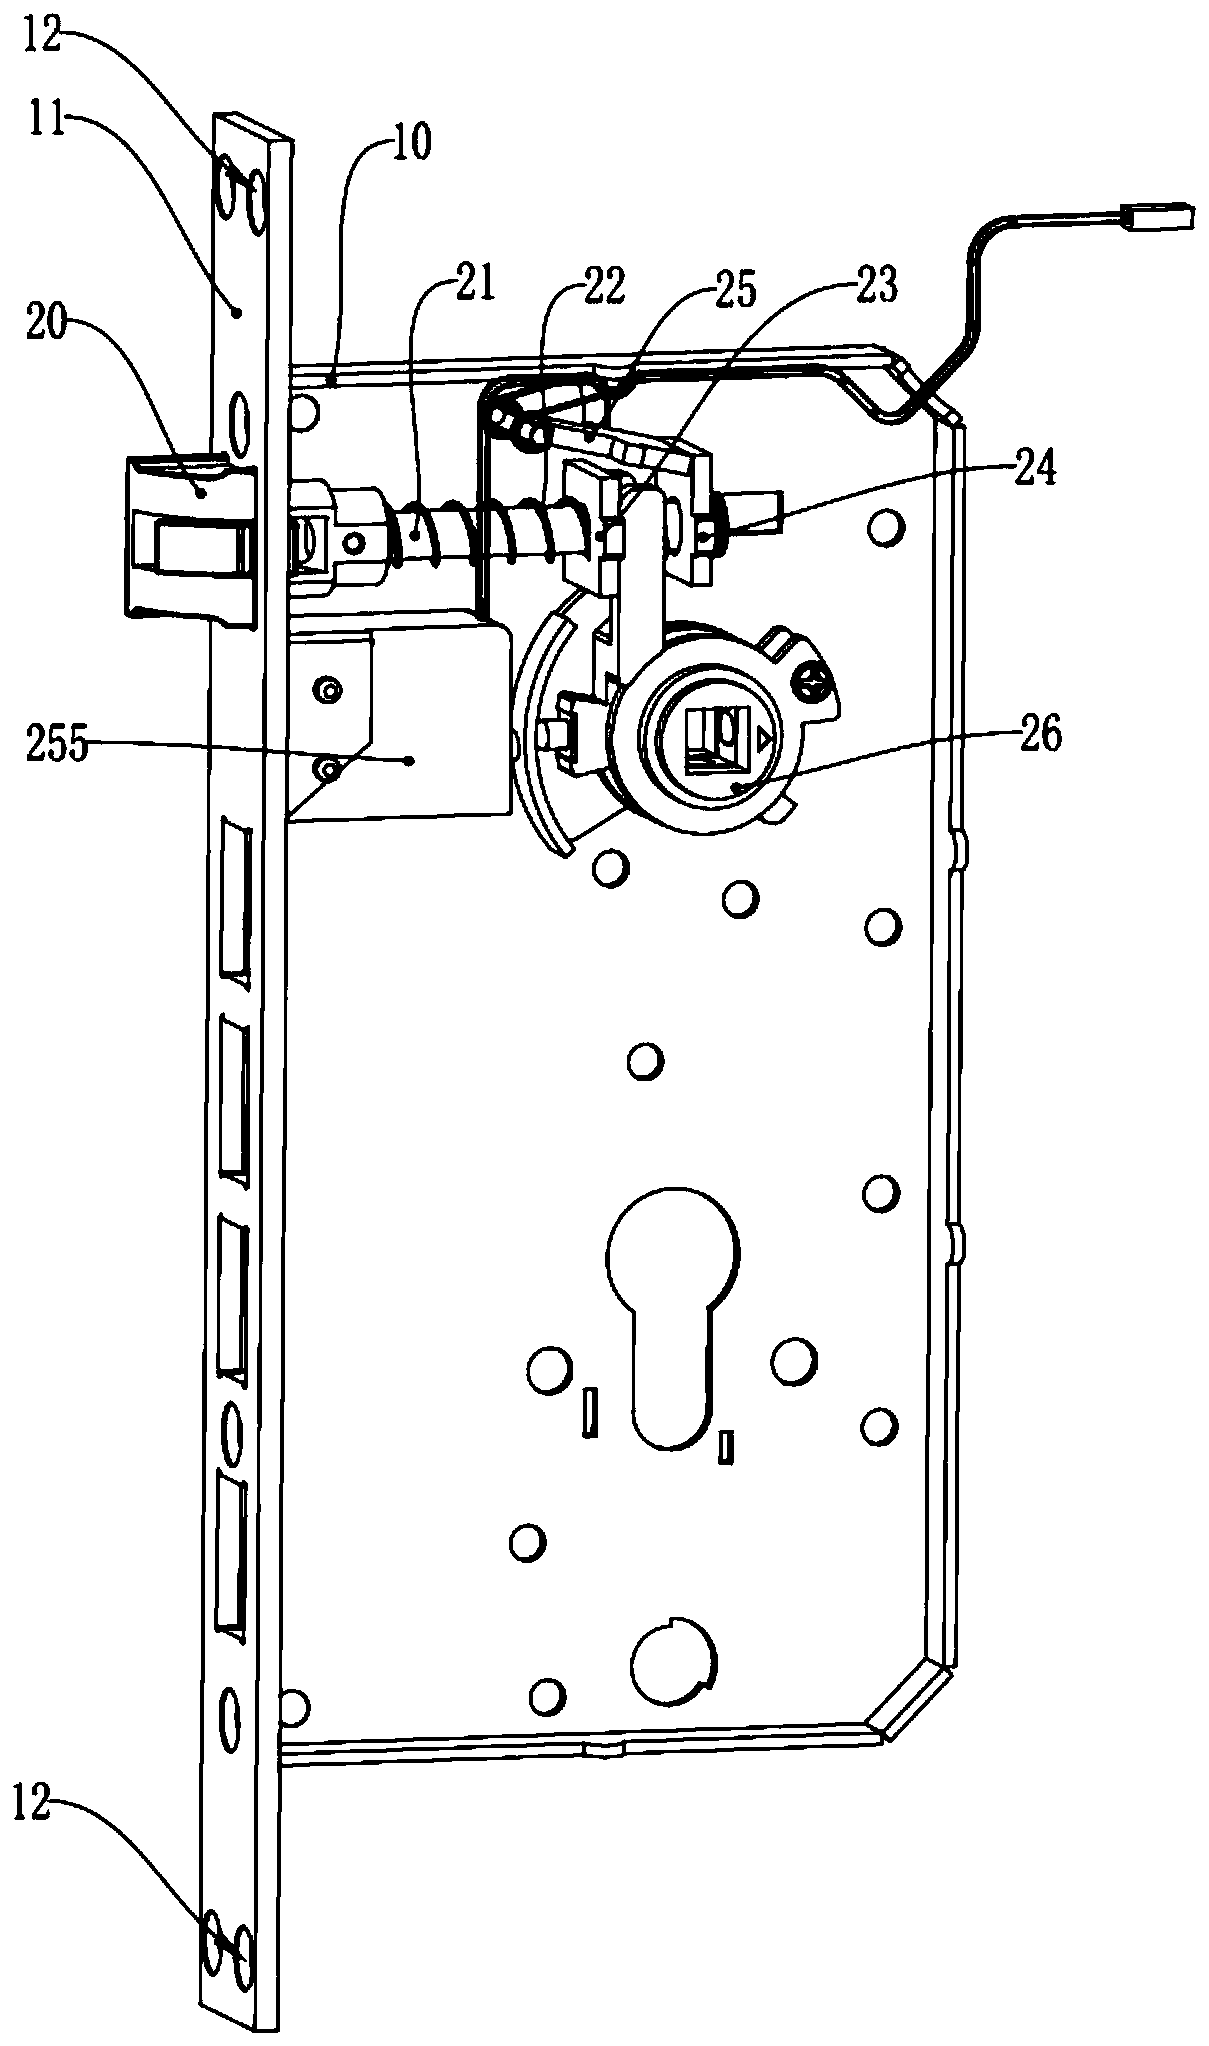 An intelligent lock body that can be quickly reversed and installed